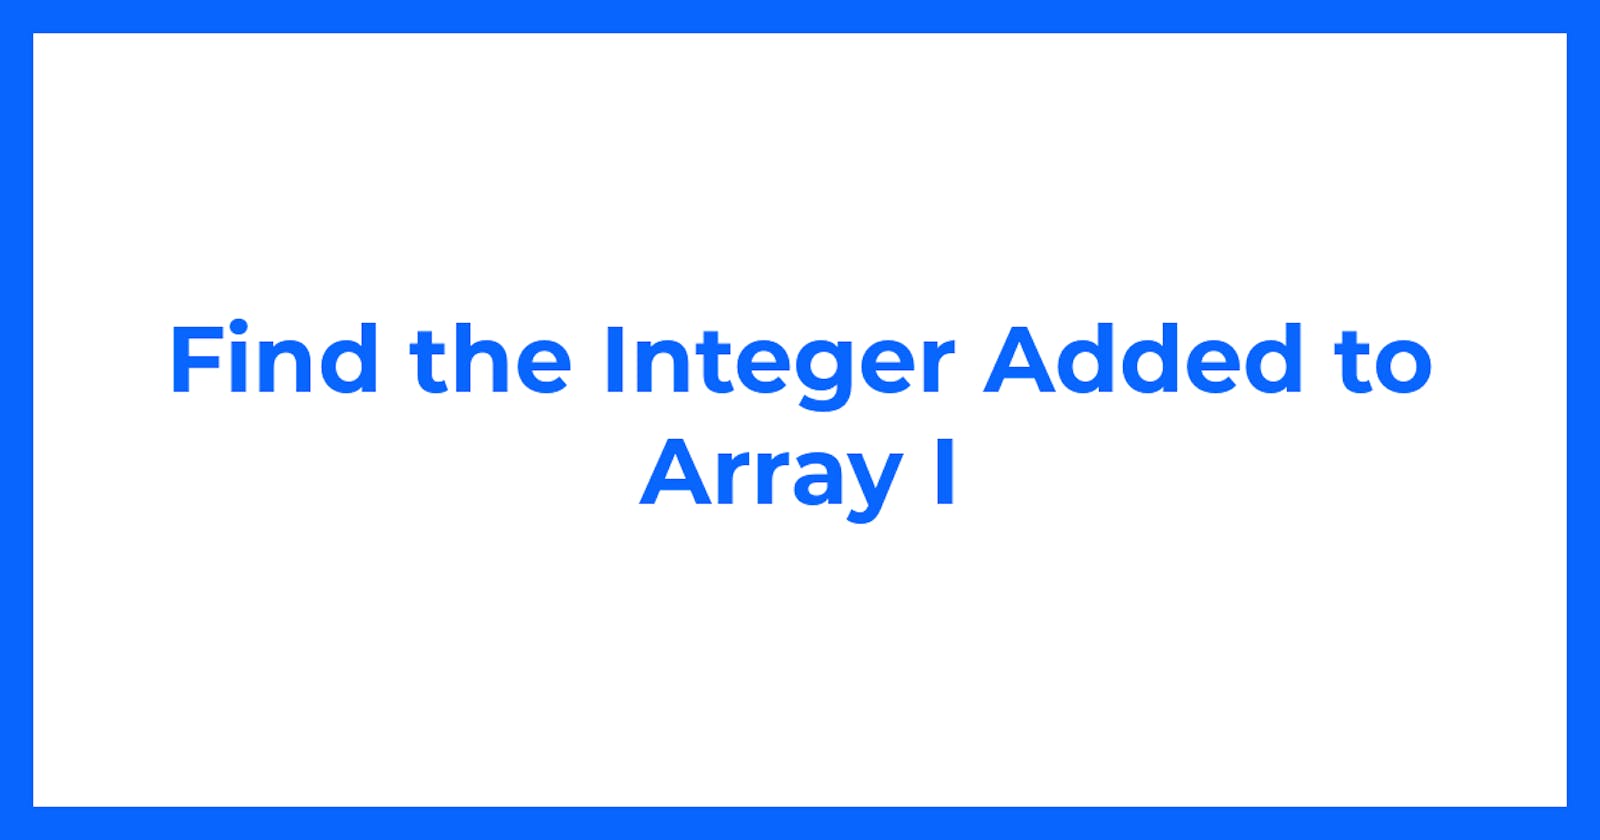 Find the Integer Added to Array I